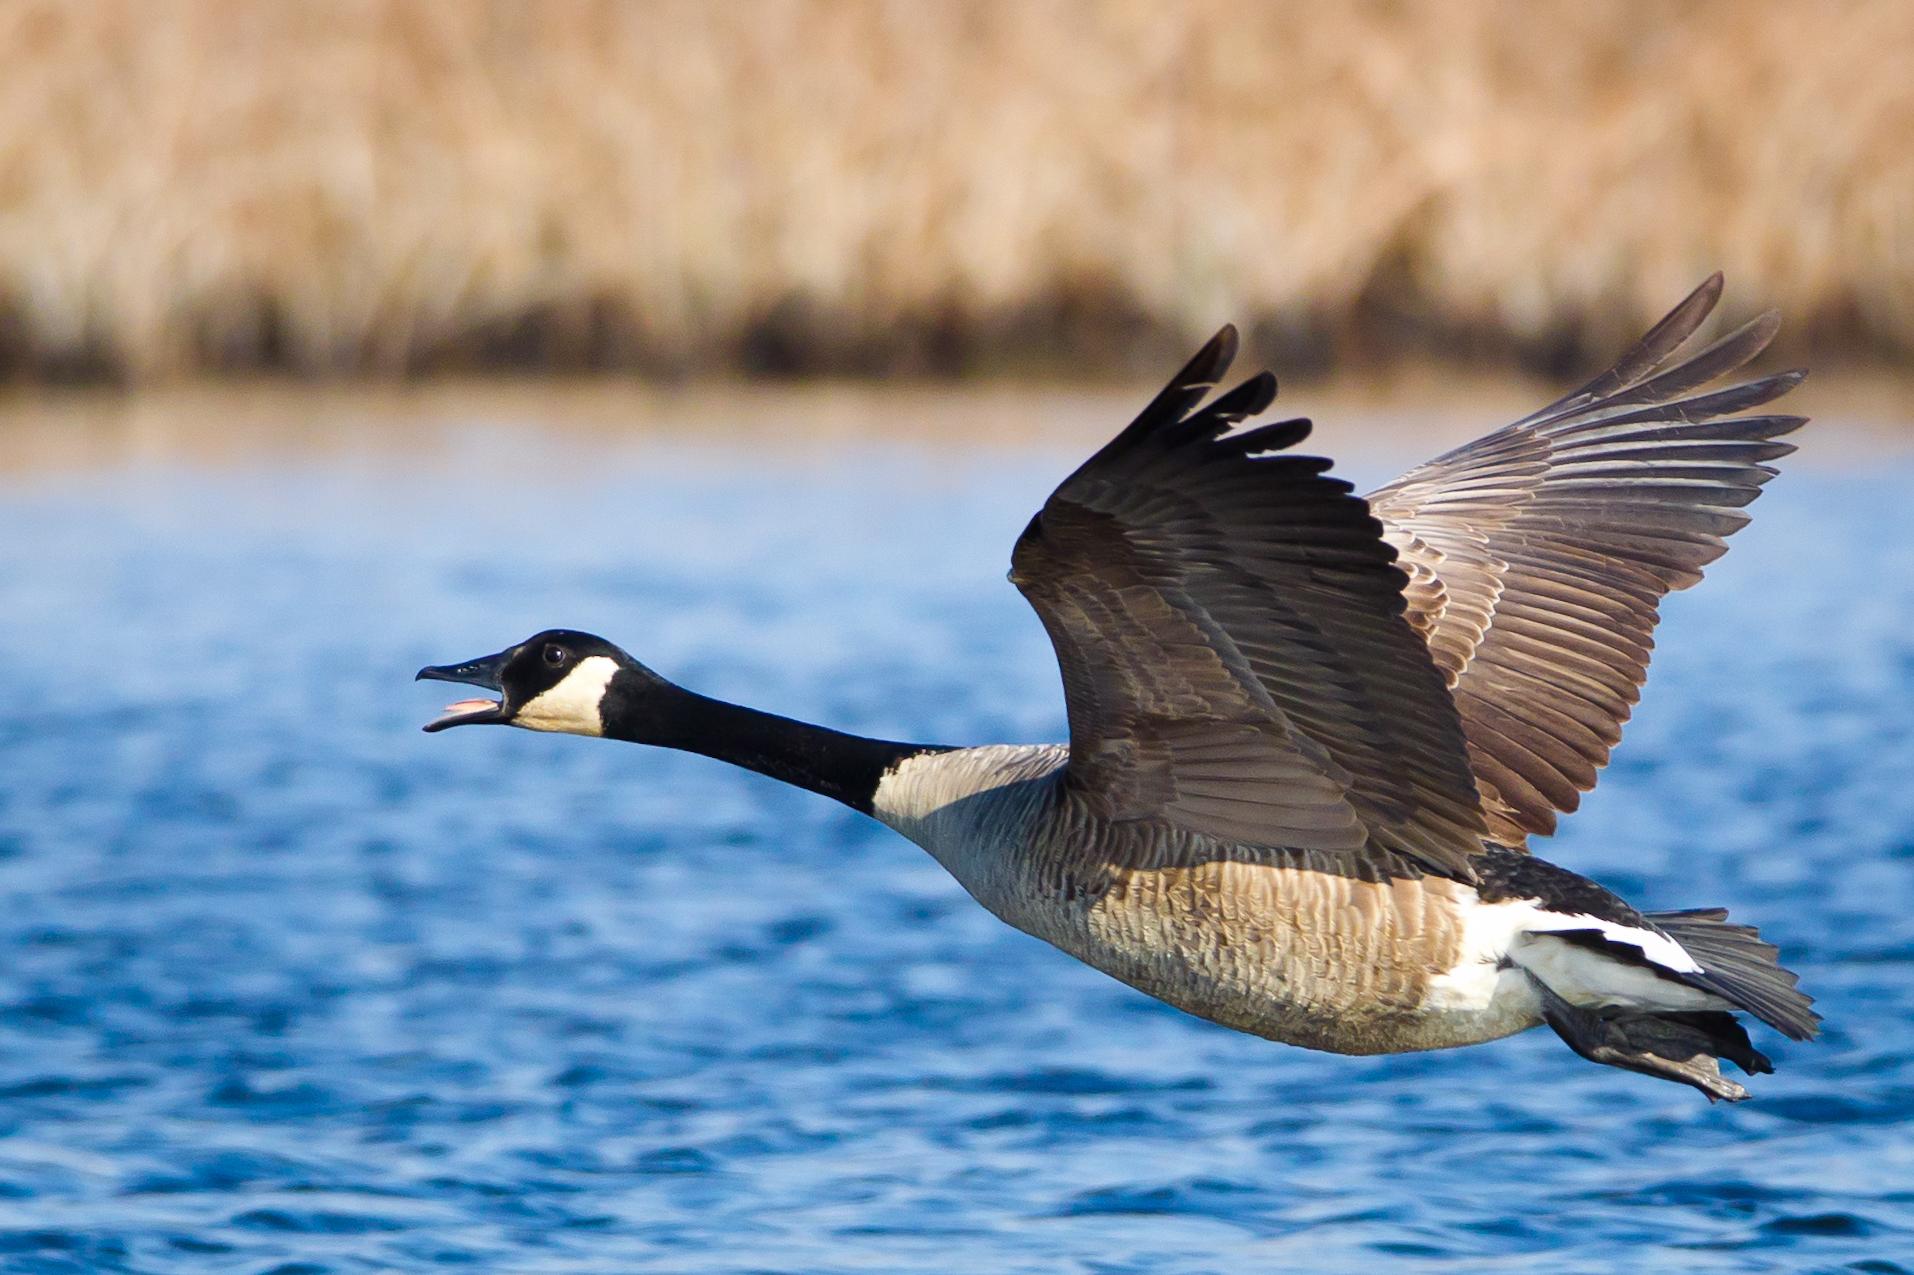 A Canada Goose flying near Oceanville, New Jersey, USA.